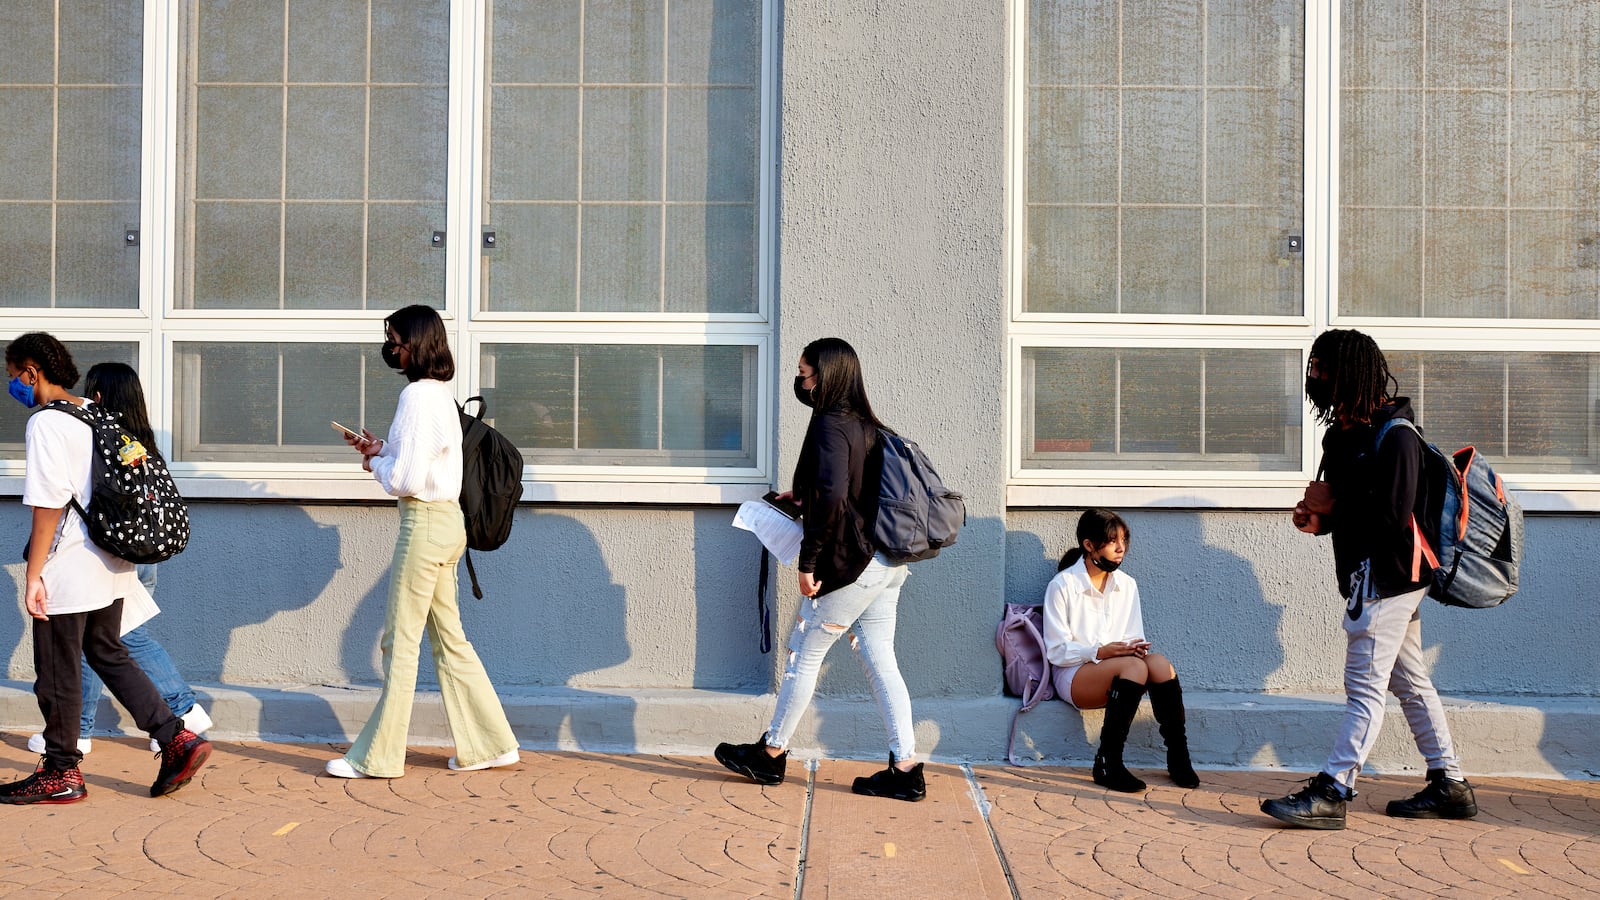 Students wait in line on school campus.